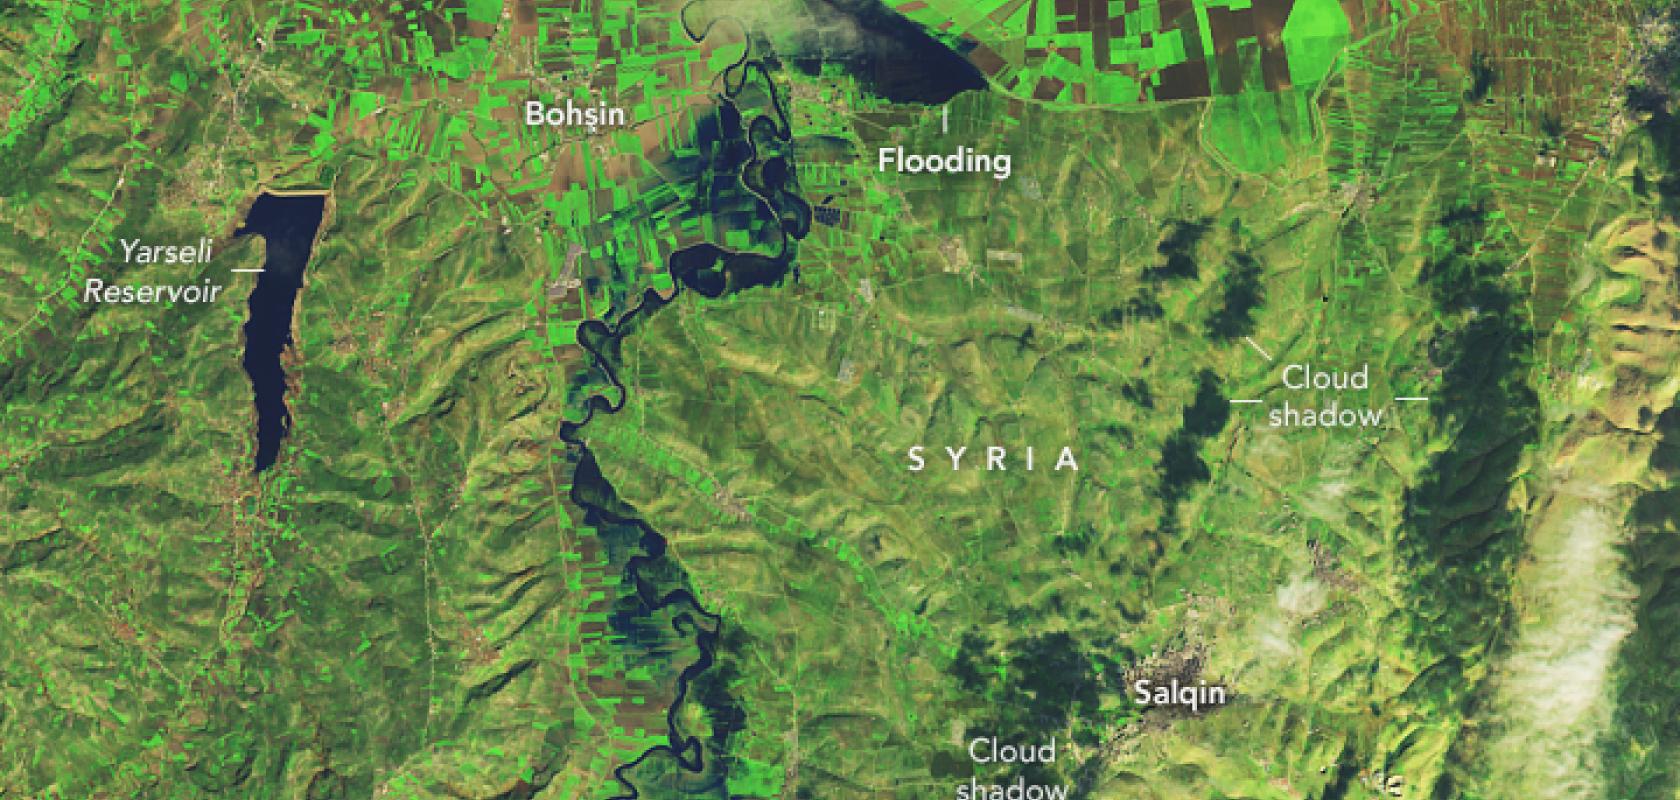 Nasa Earth Observatory satellite image showing flooding along the Orontes River